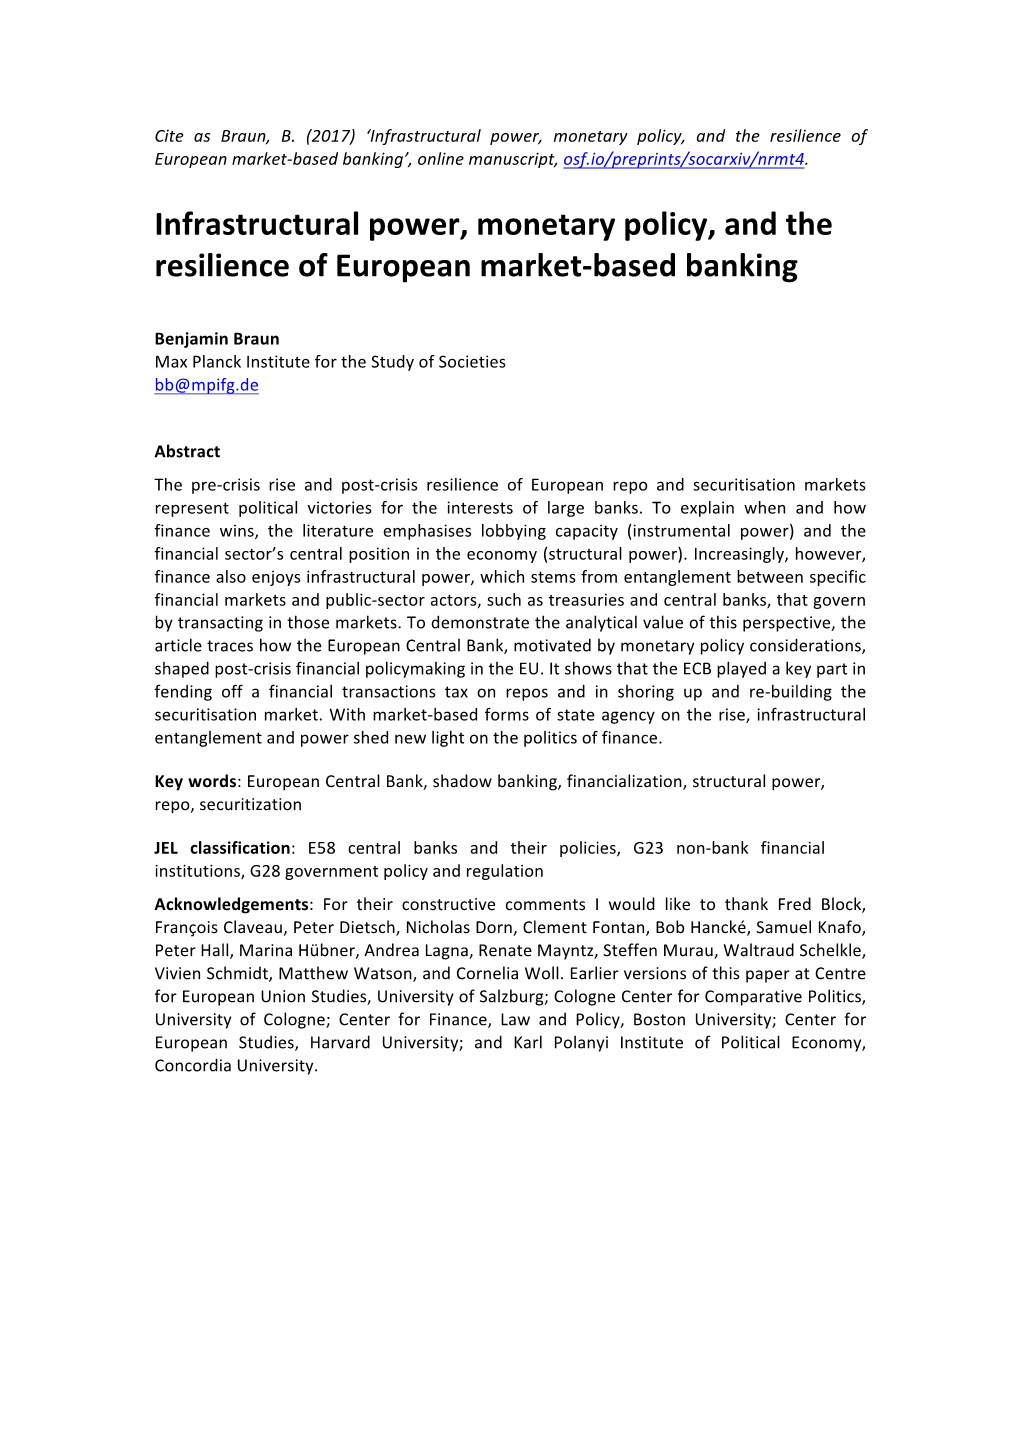 Infrastructural Power, Monetary Policy, and the Resilience of European Market-Based Banking’, Online Manuscript, Osf.Io/Preprints/Socarxiv/Nrmt4